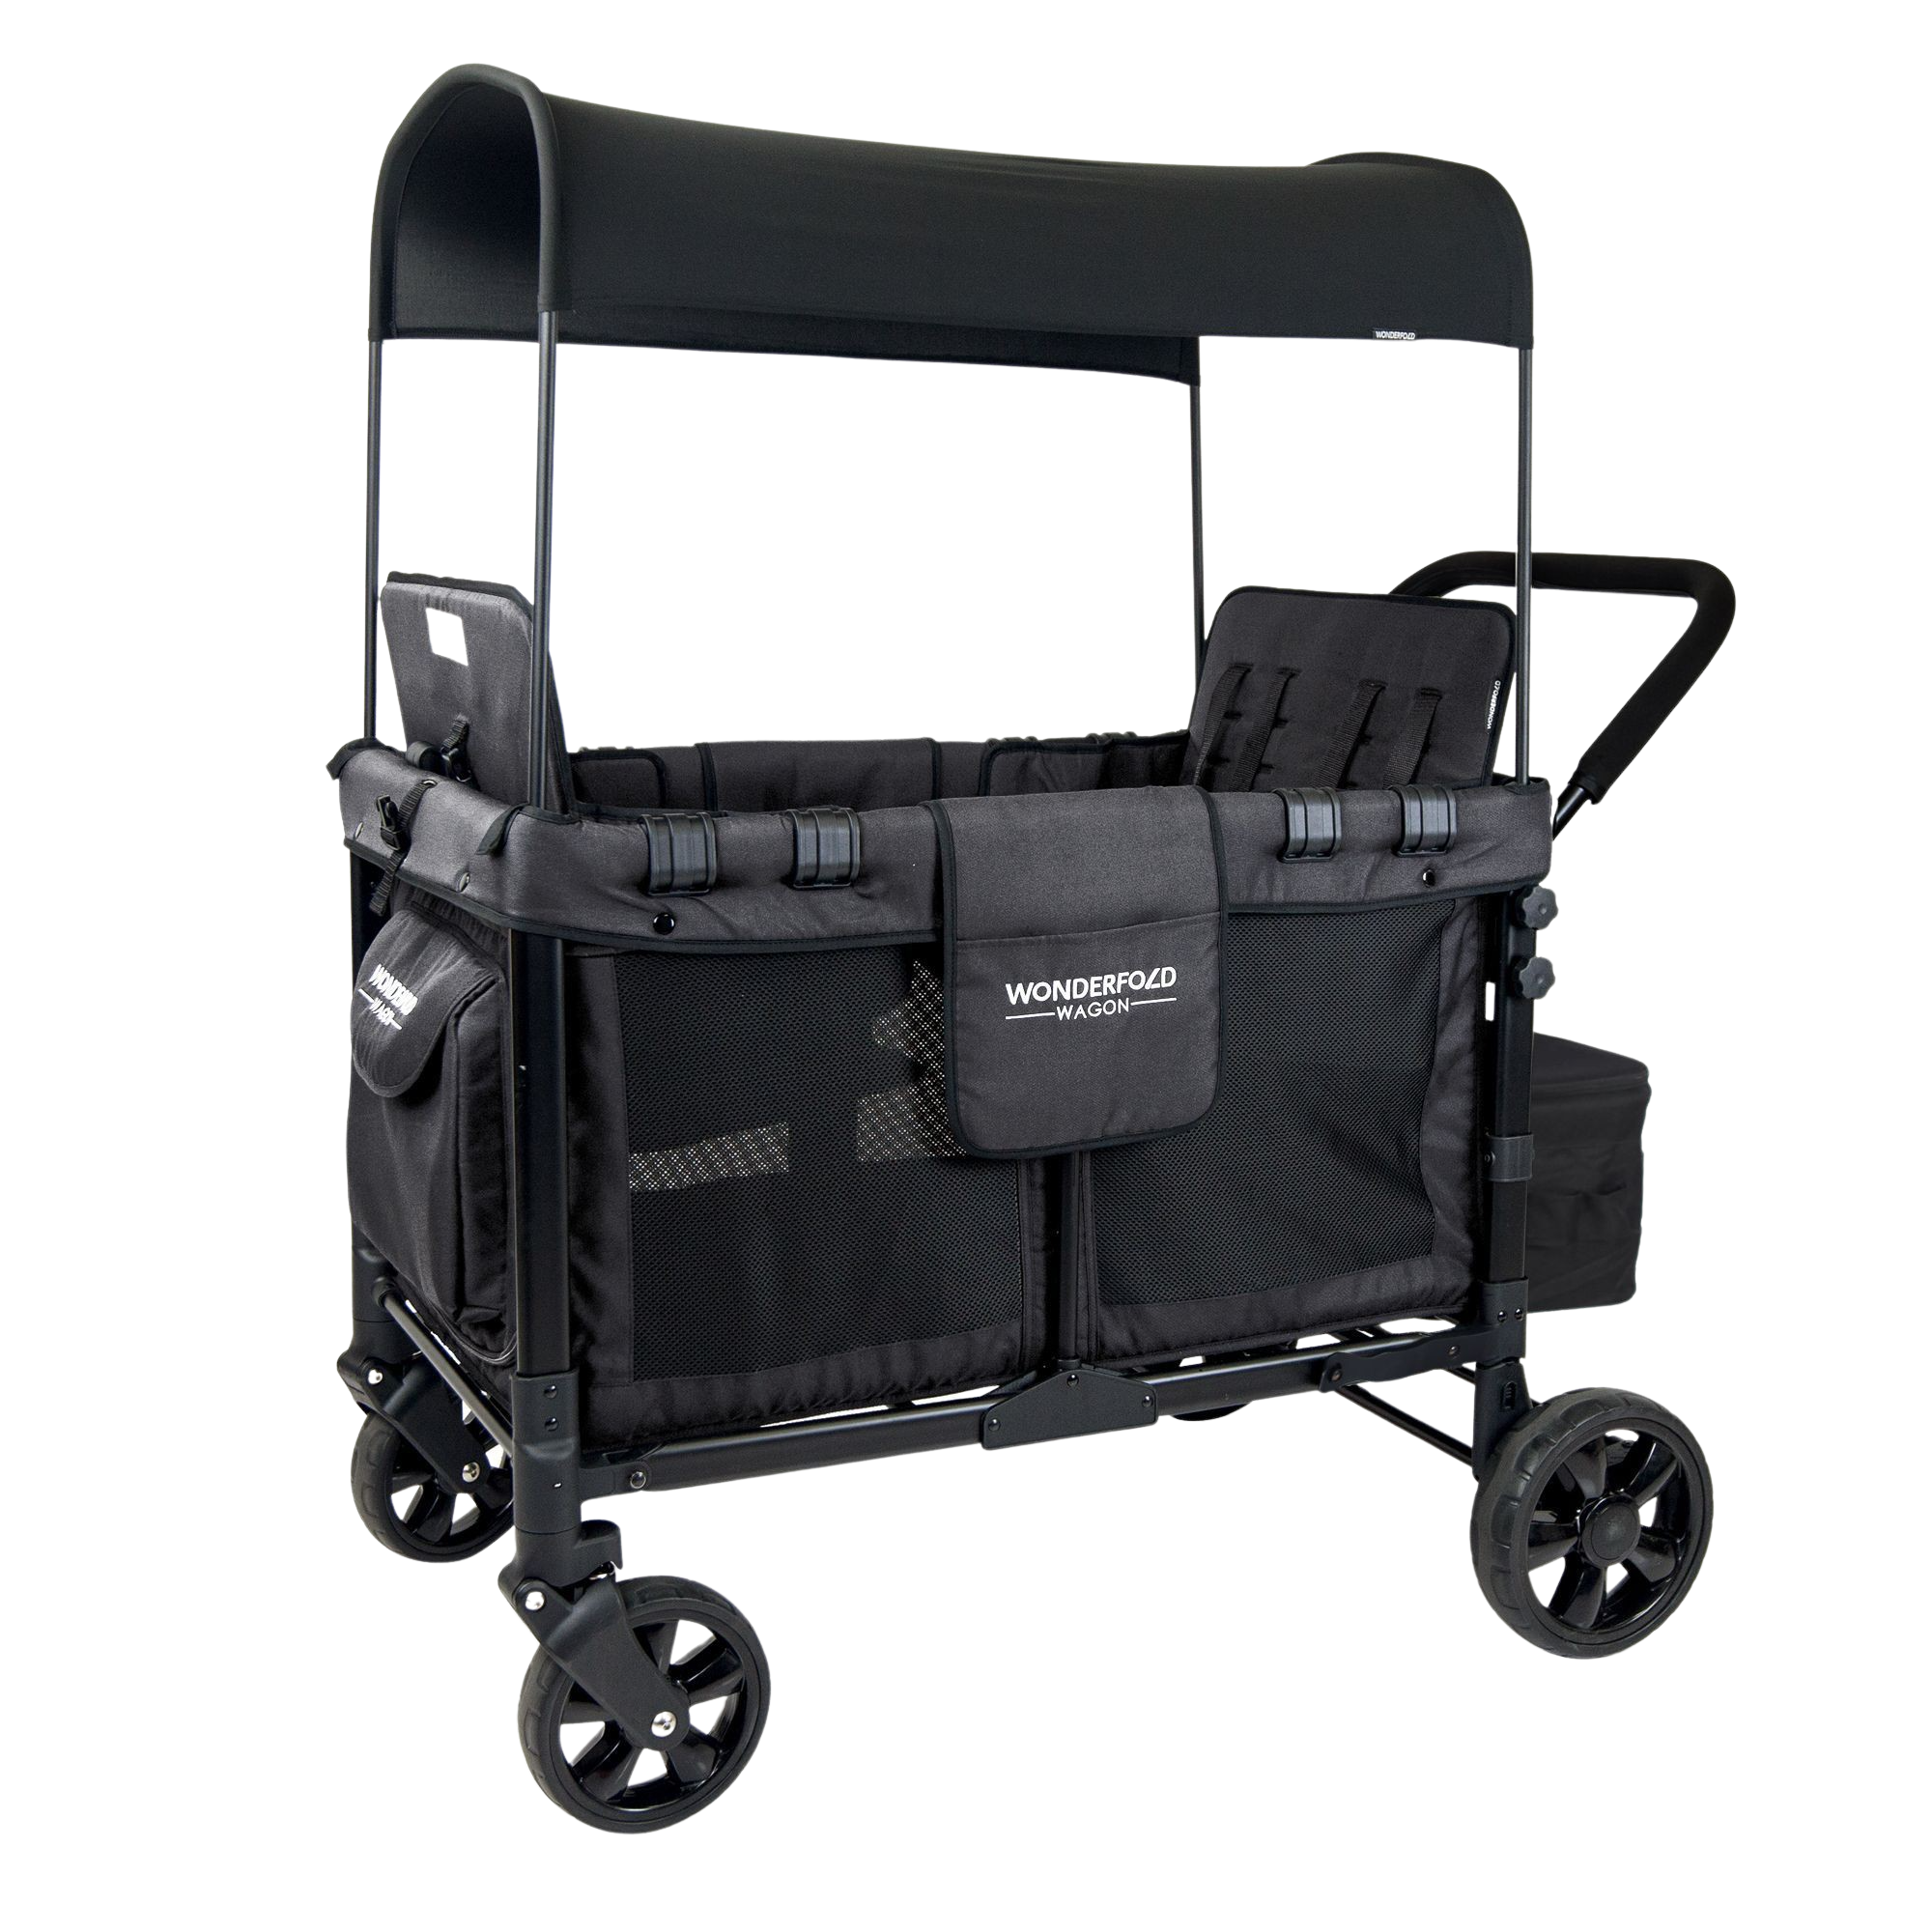 WonderFold Baby, WonderFold Baby W4 Multi-Function Folding Quad Stroller Wagon with Removable Canopy and Seats Gray & Black New